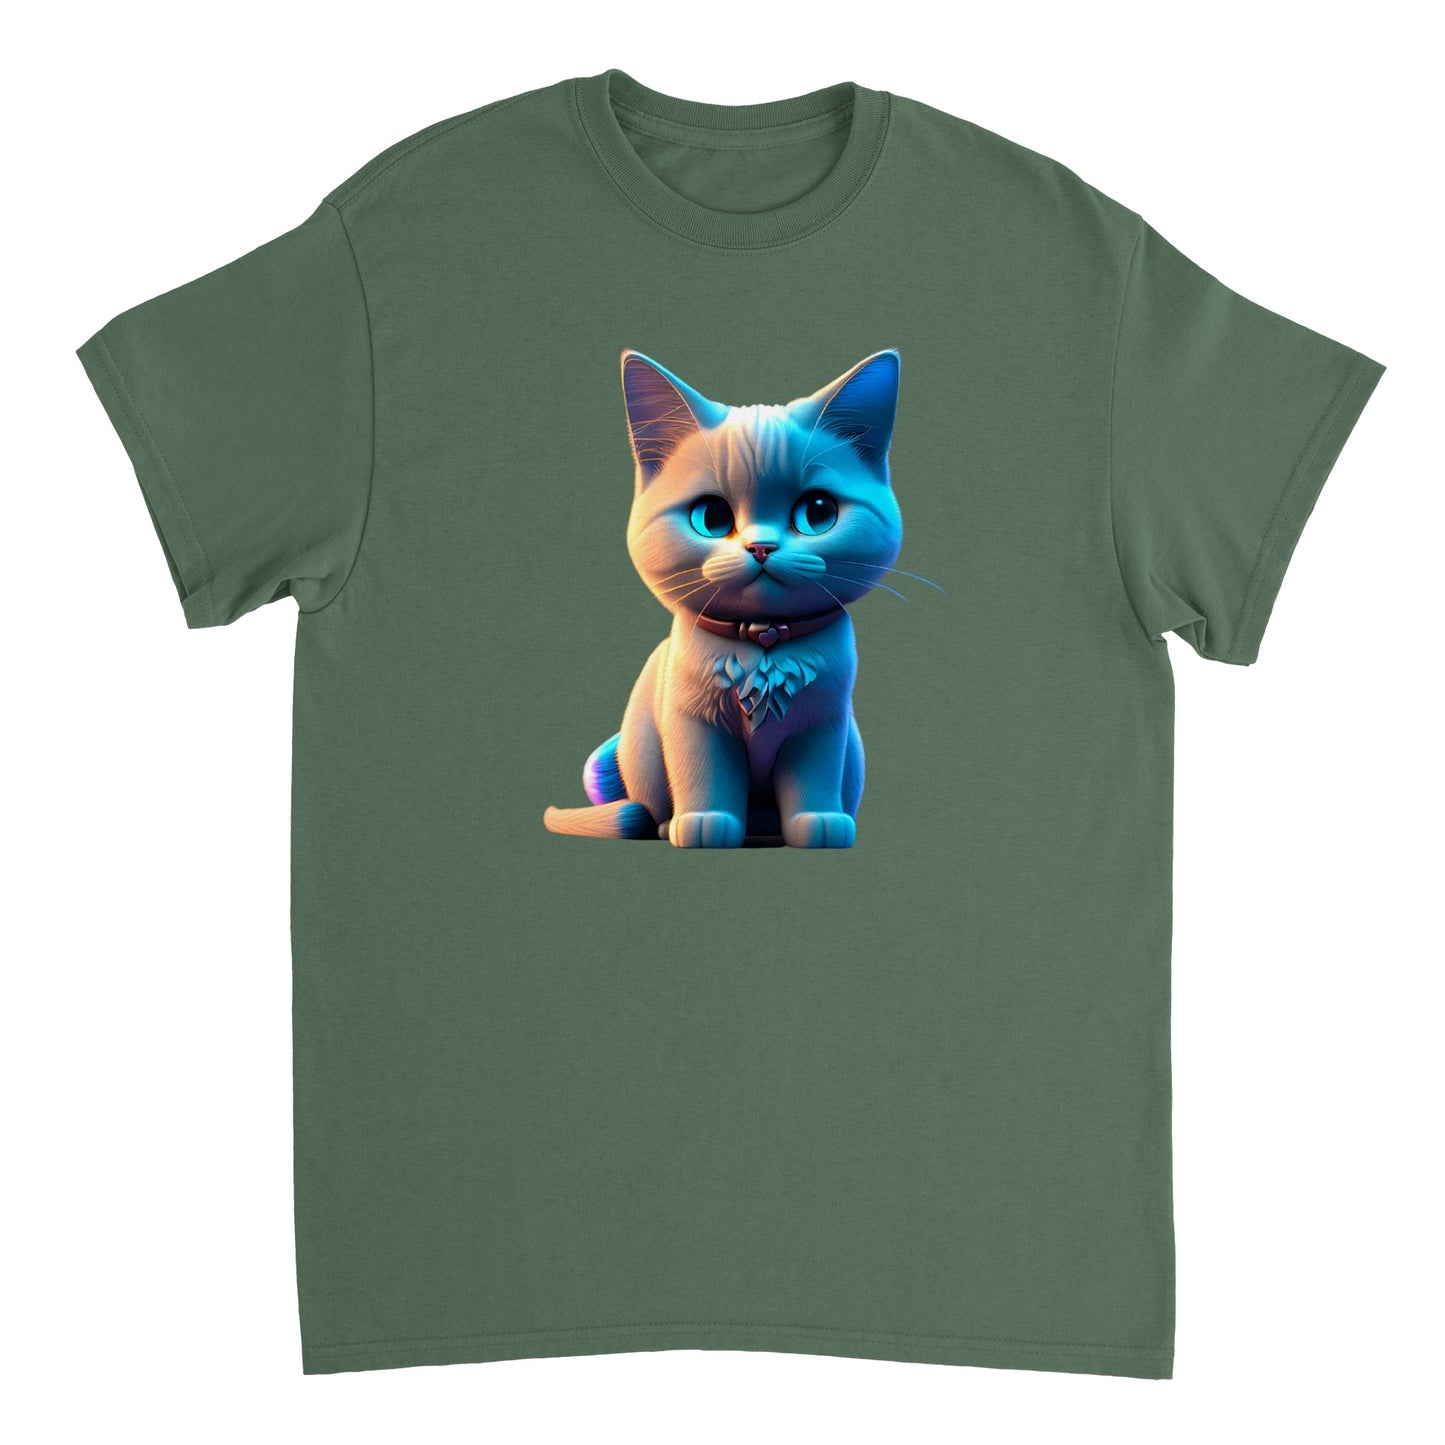 Adorable, Cool, Cute Cats and Kittens Toy - Heavyweight Unisex Crewneck T-shirt 34